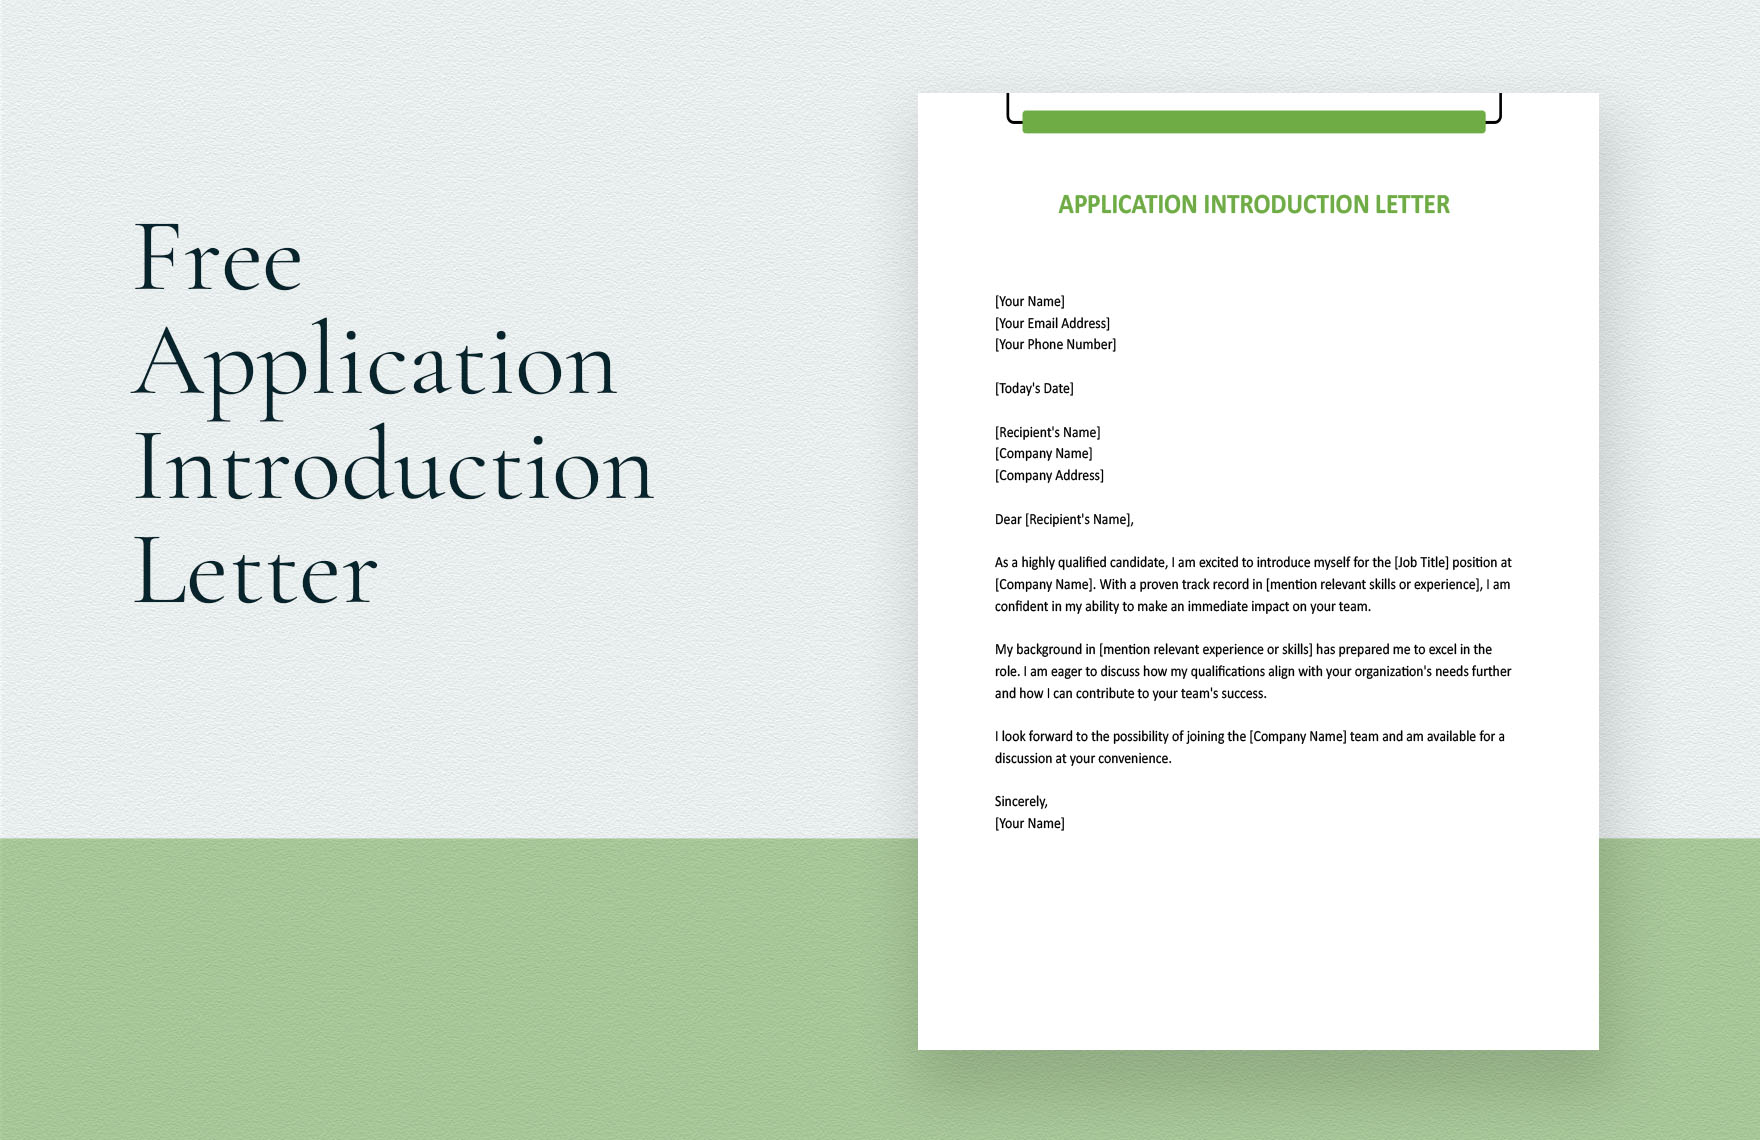 Application Introduction Letter